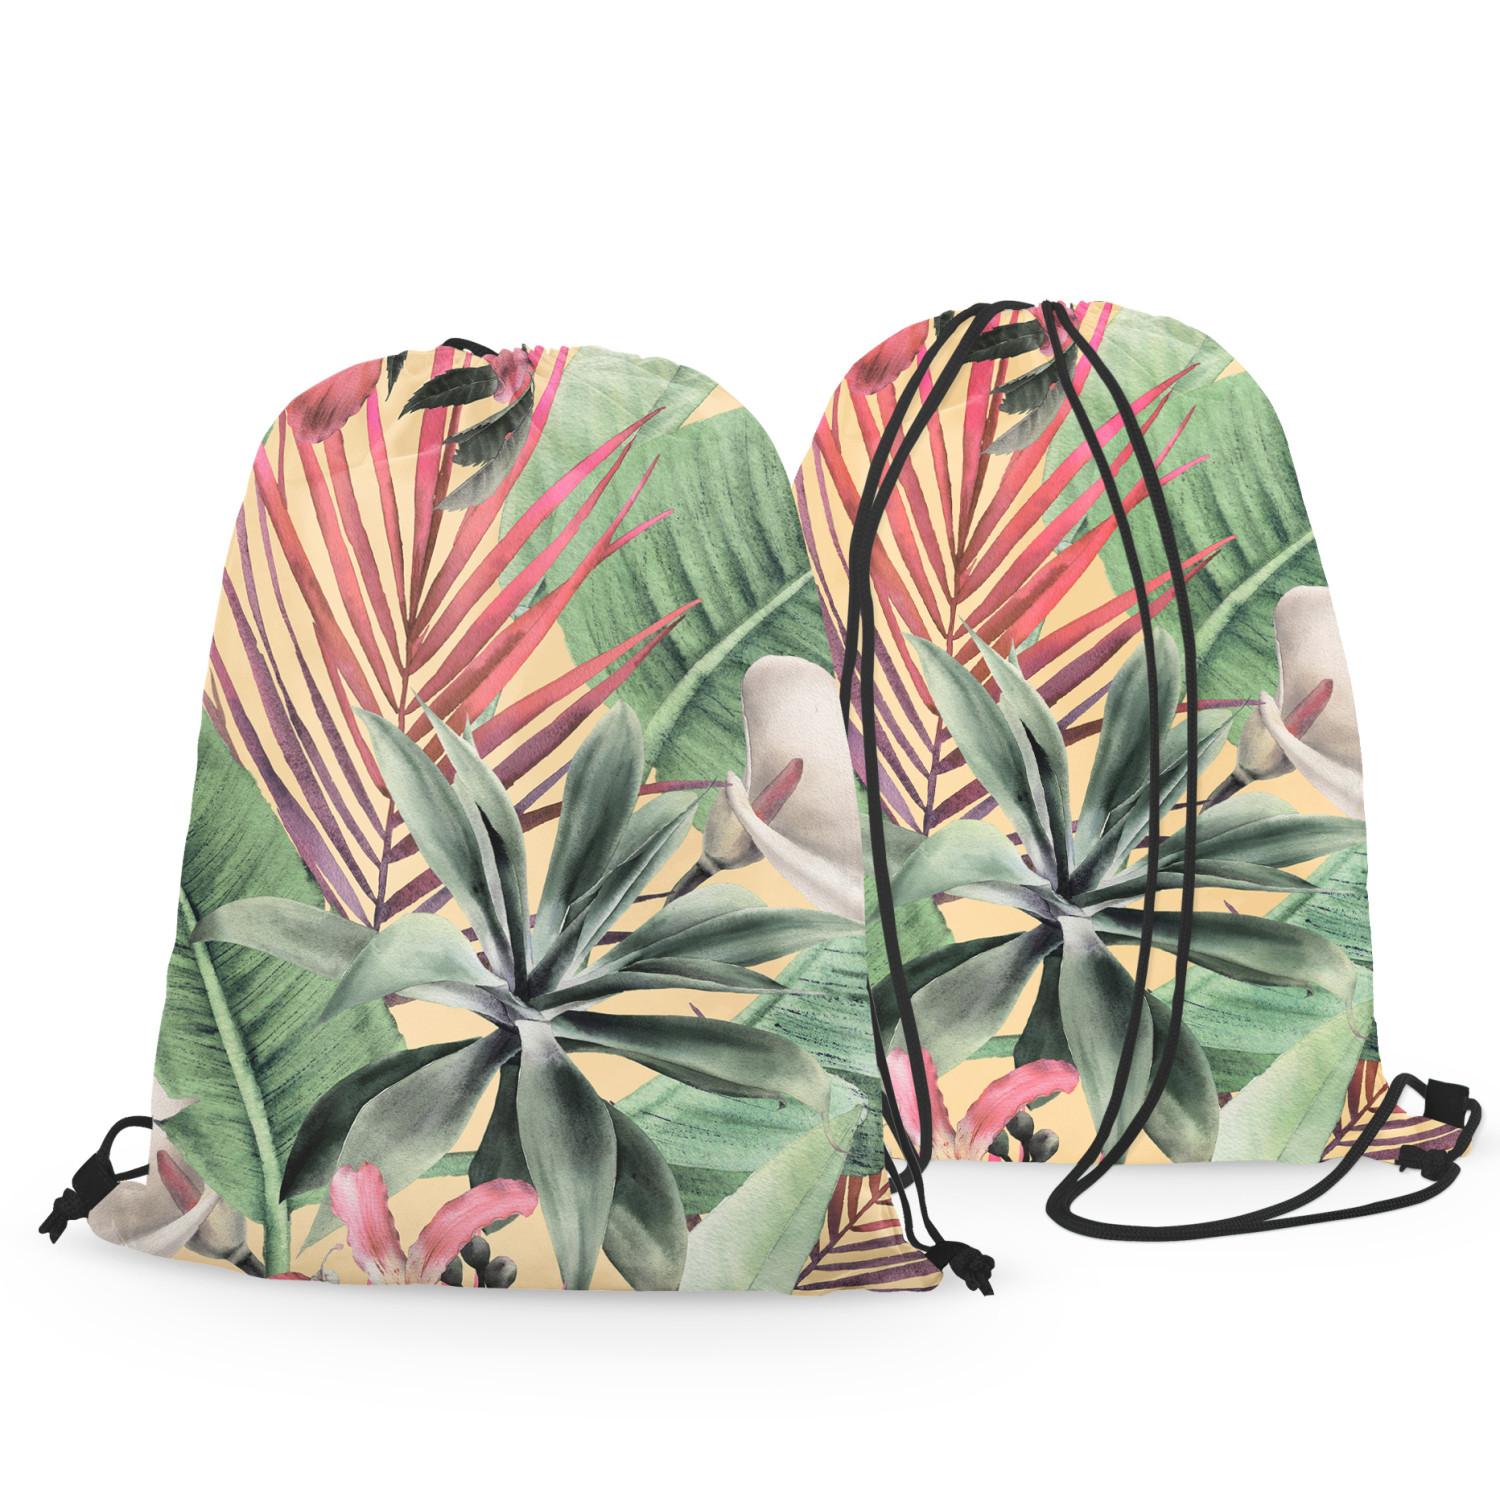 Mochila Rainforest flora - a floral pattern with white flowers and leaves